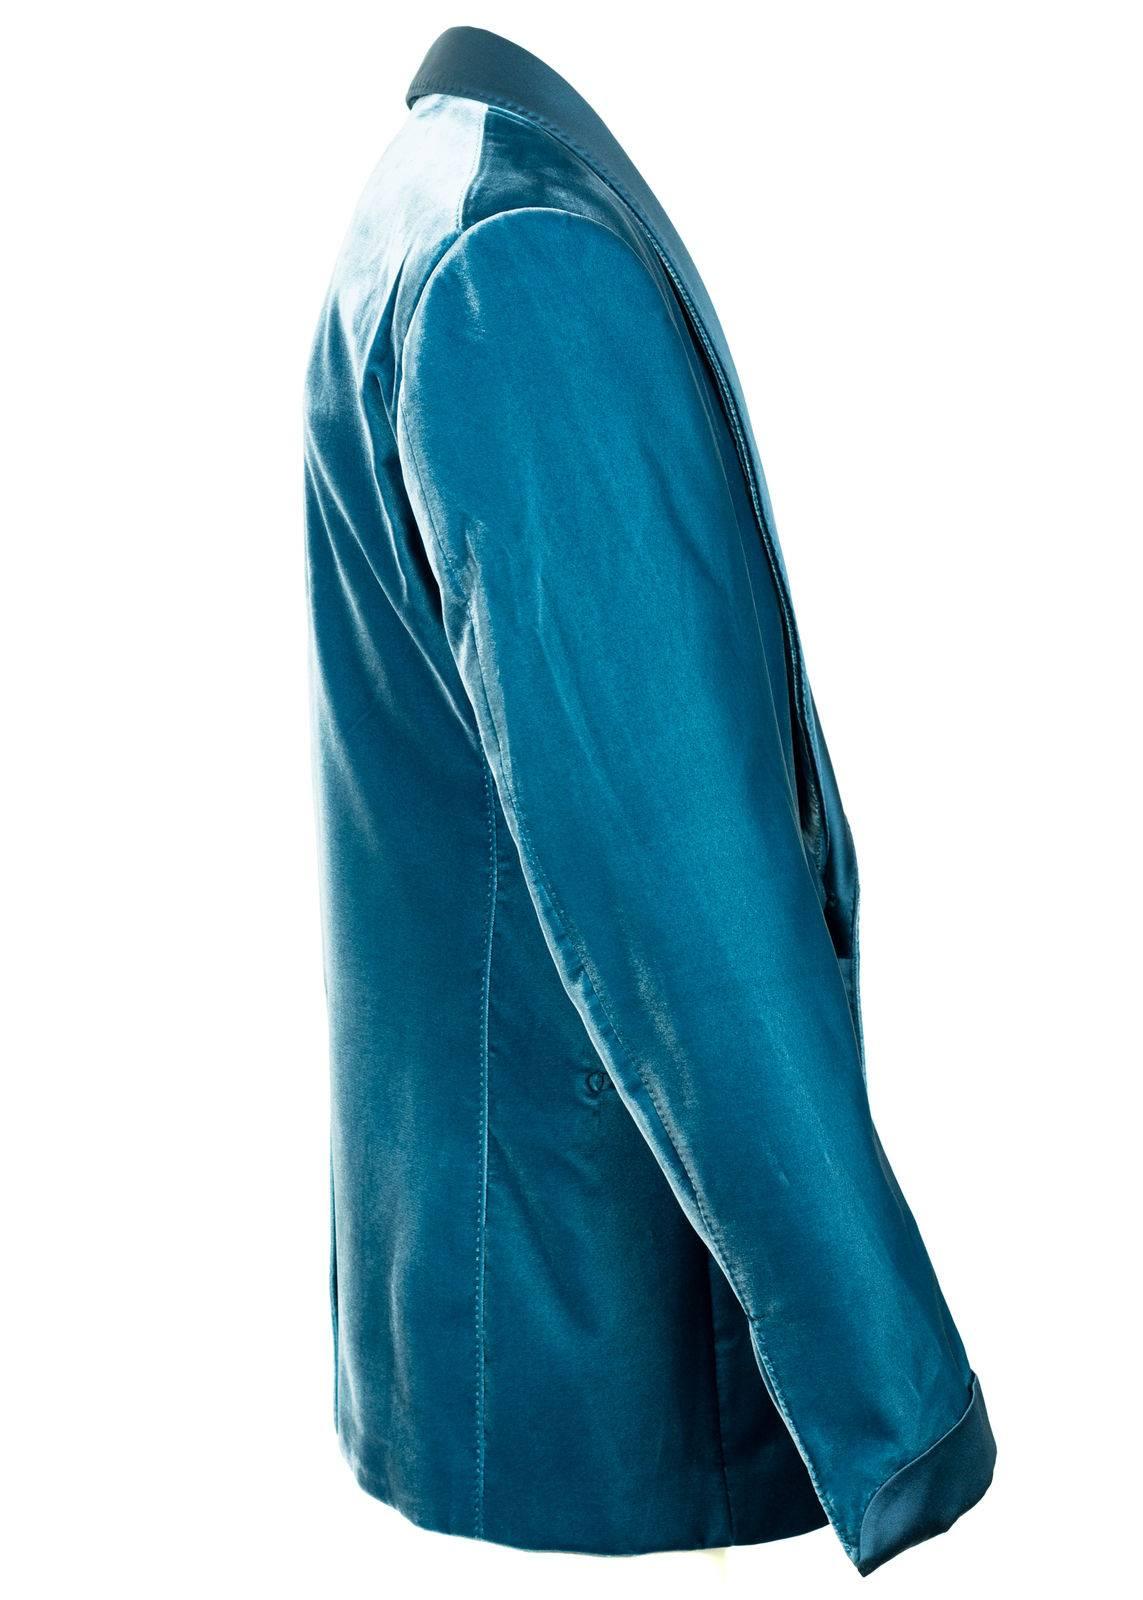 Tom Ford Aqua Blue Velvet Shawl Lapel Shelton Cocktail Jacket 56R/46R RTL $3980 In Excellent Condition For Sale In Brooklyn, NY